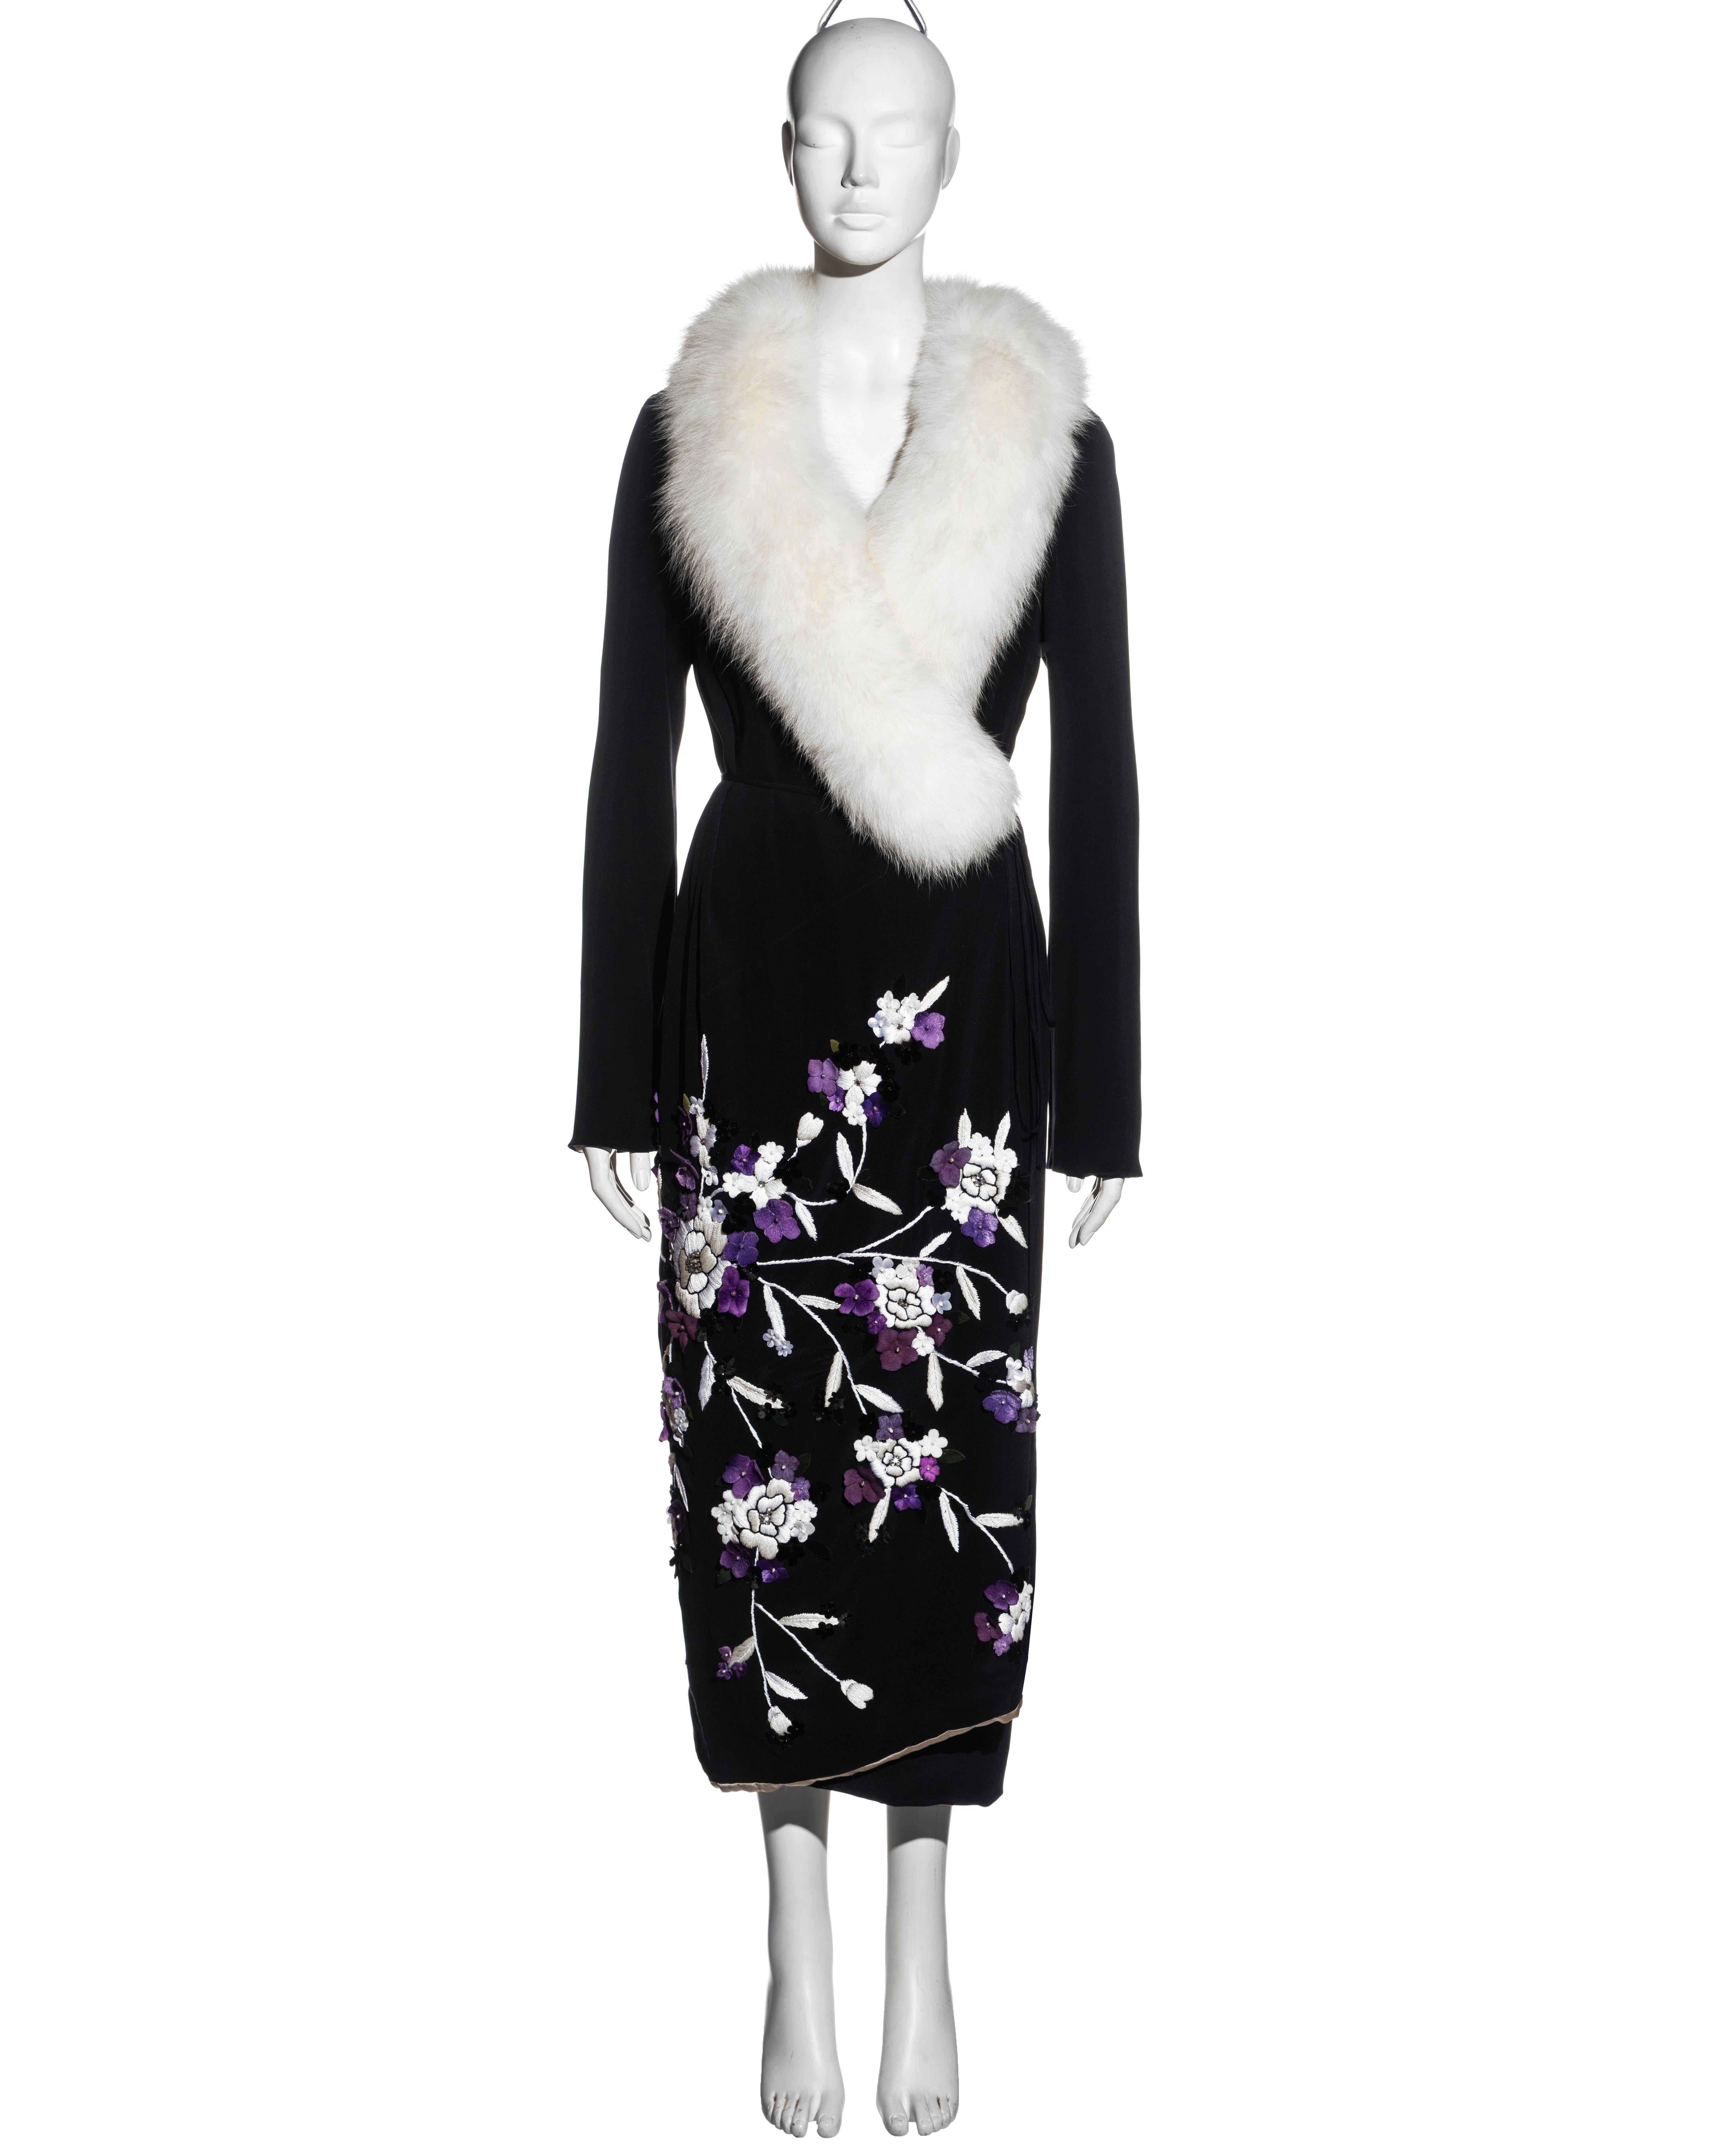 ▪ Dolce & Gabbana black silk evening wrap coat
▪ White fox fur collar 
▪ White and purple hand-sewn embroidery 
▪ Velvet floral appliques 
▪ Crystal embellishments 
▪ Ivory silk lining 
▪ IT 44 - FR 40 - UK 12 - US 8
▪ Fall-Winter 1997
▪ 100% Silk